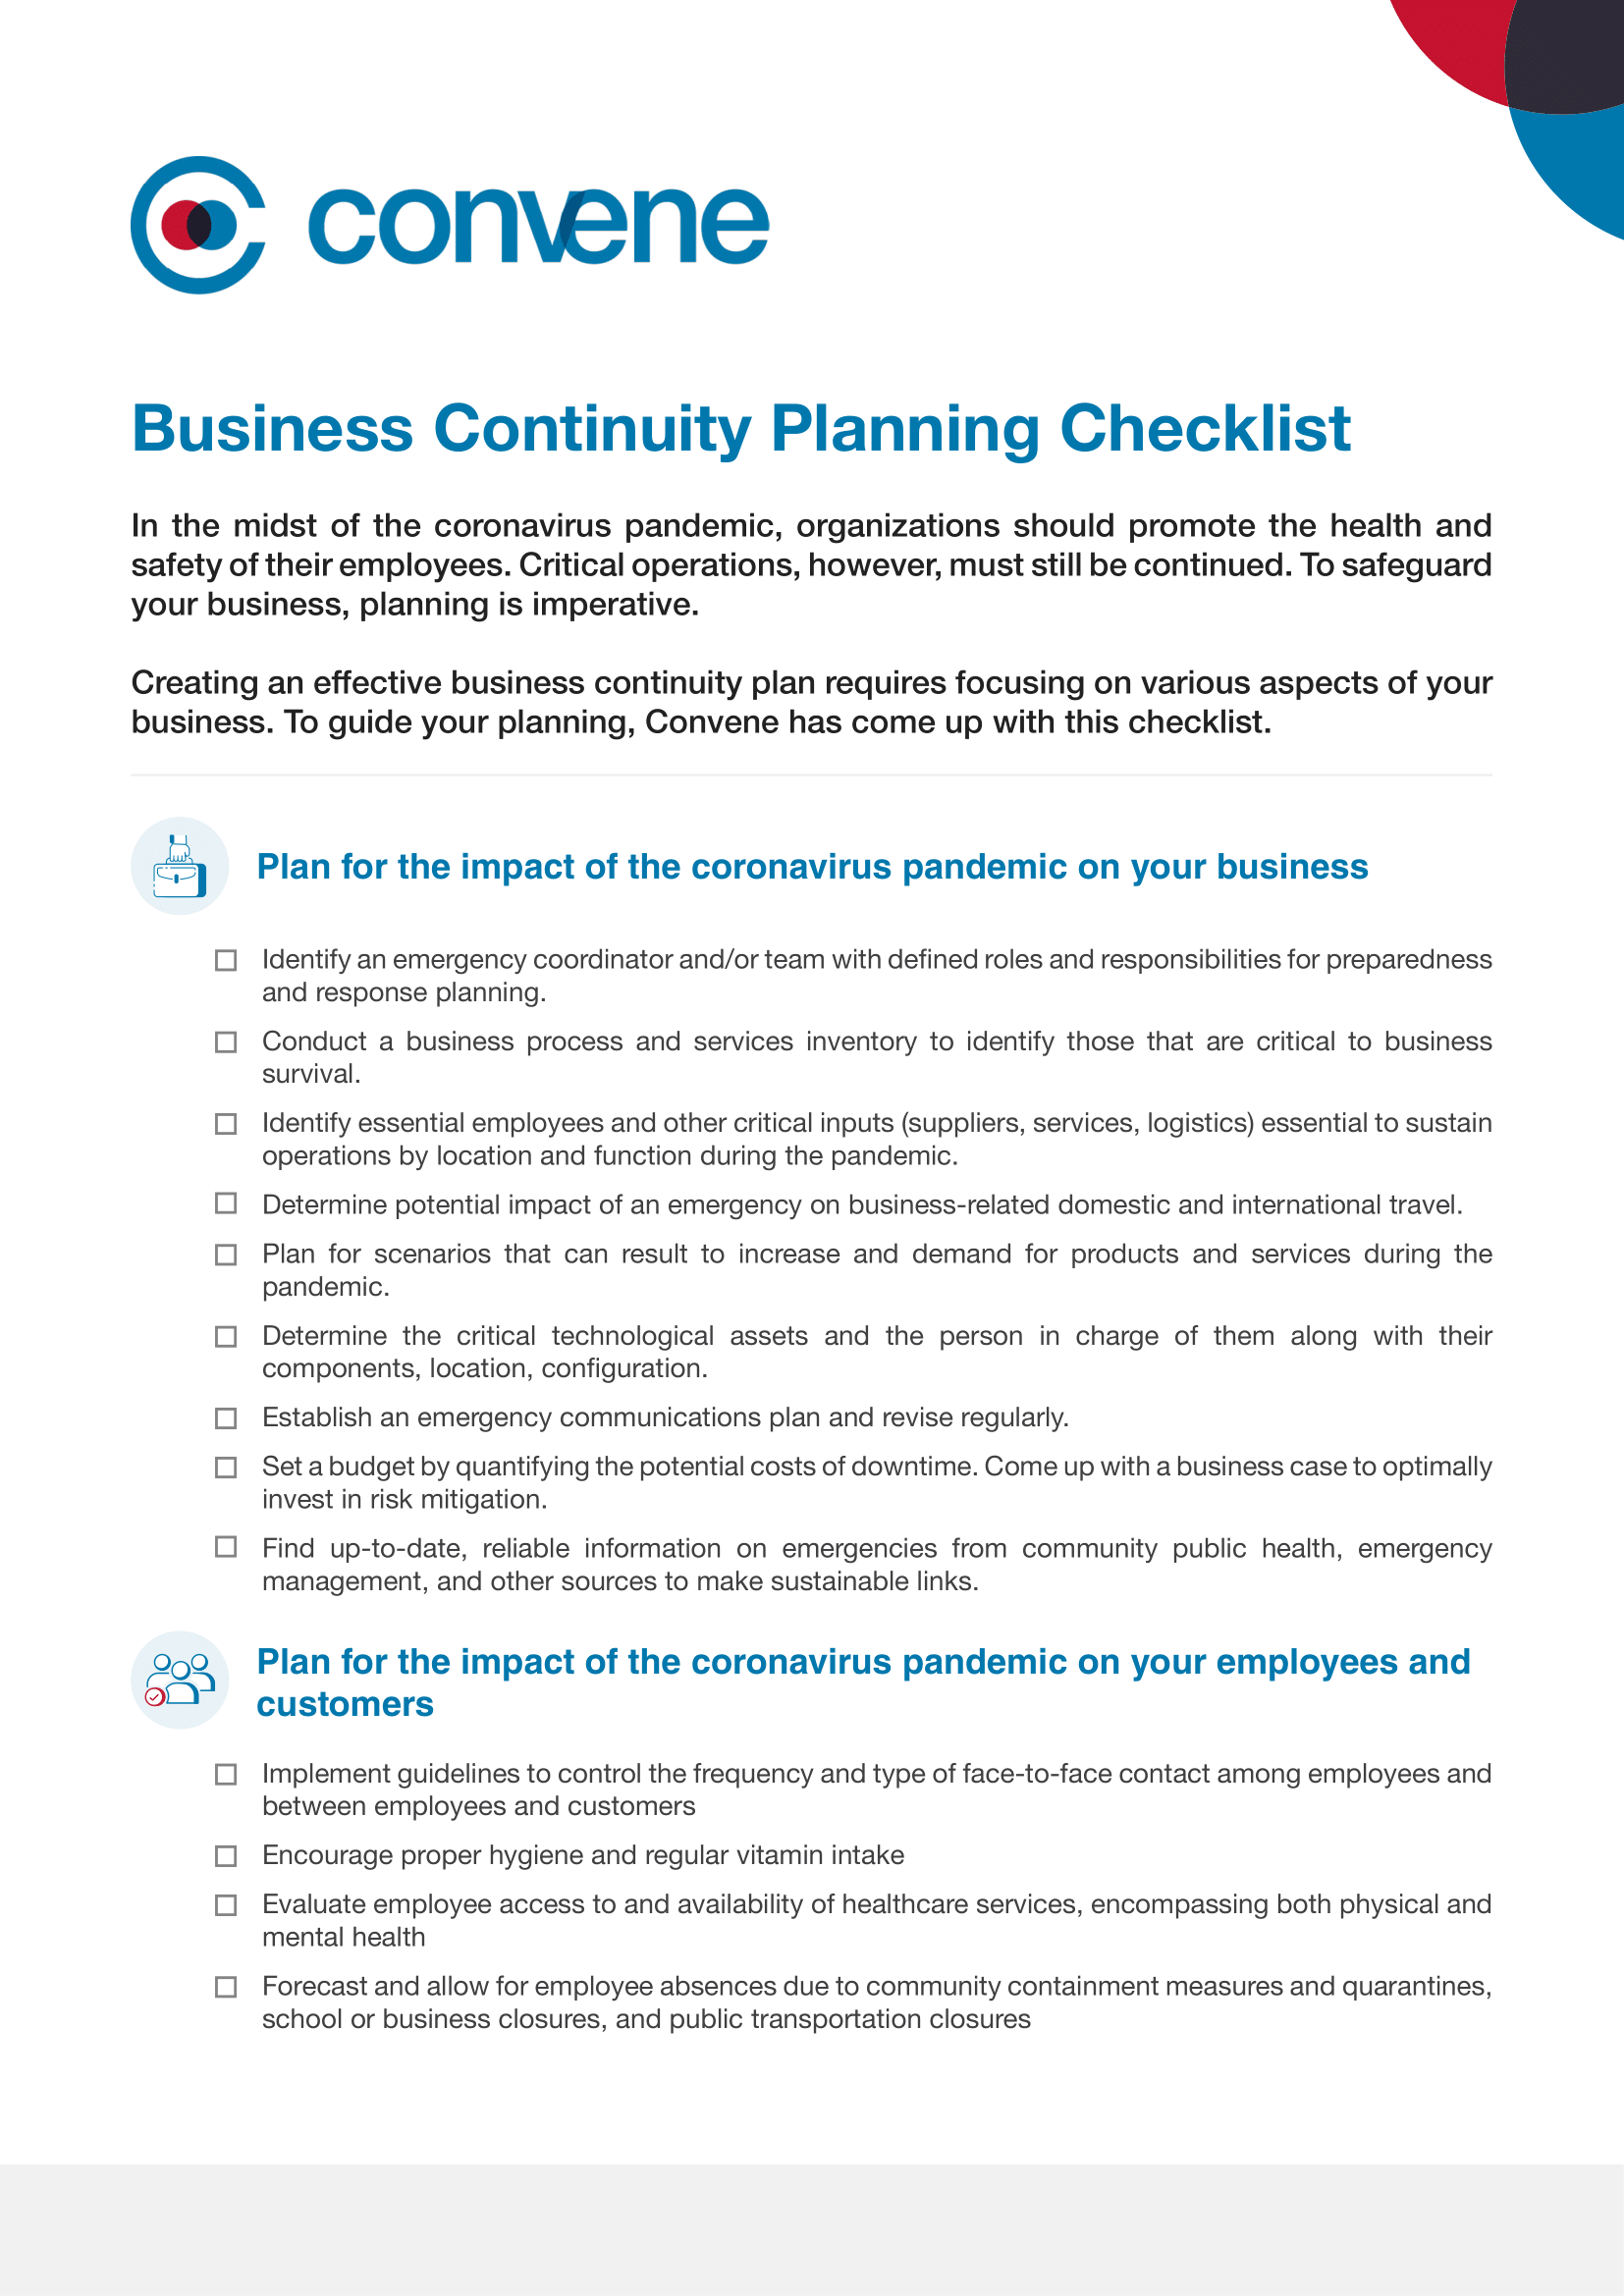 business continuity planning checklist part 1